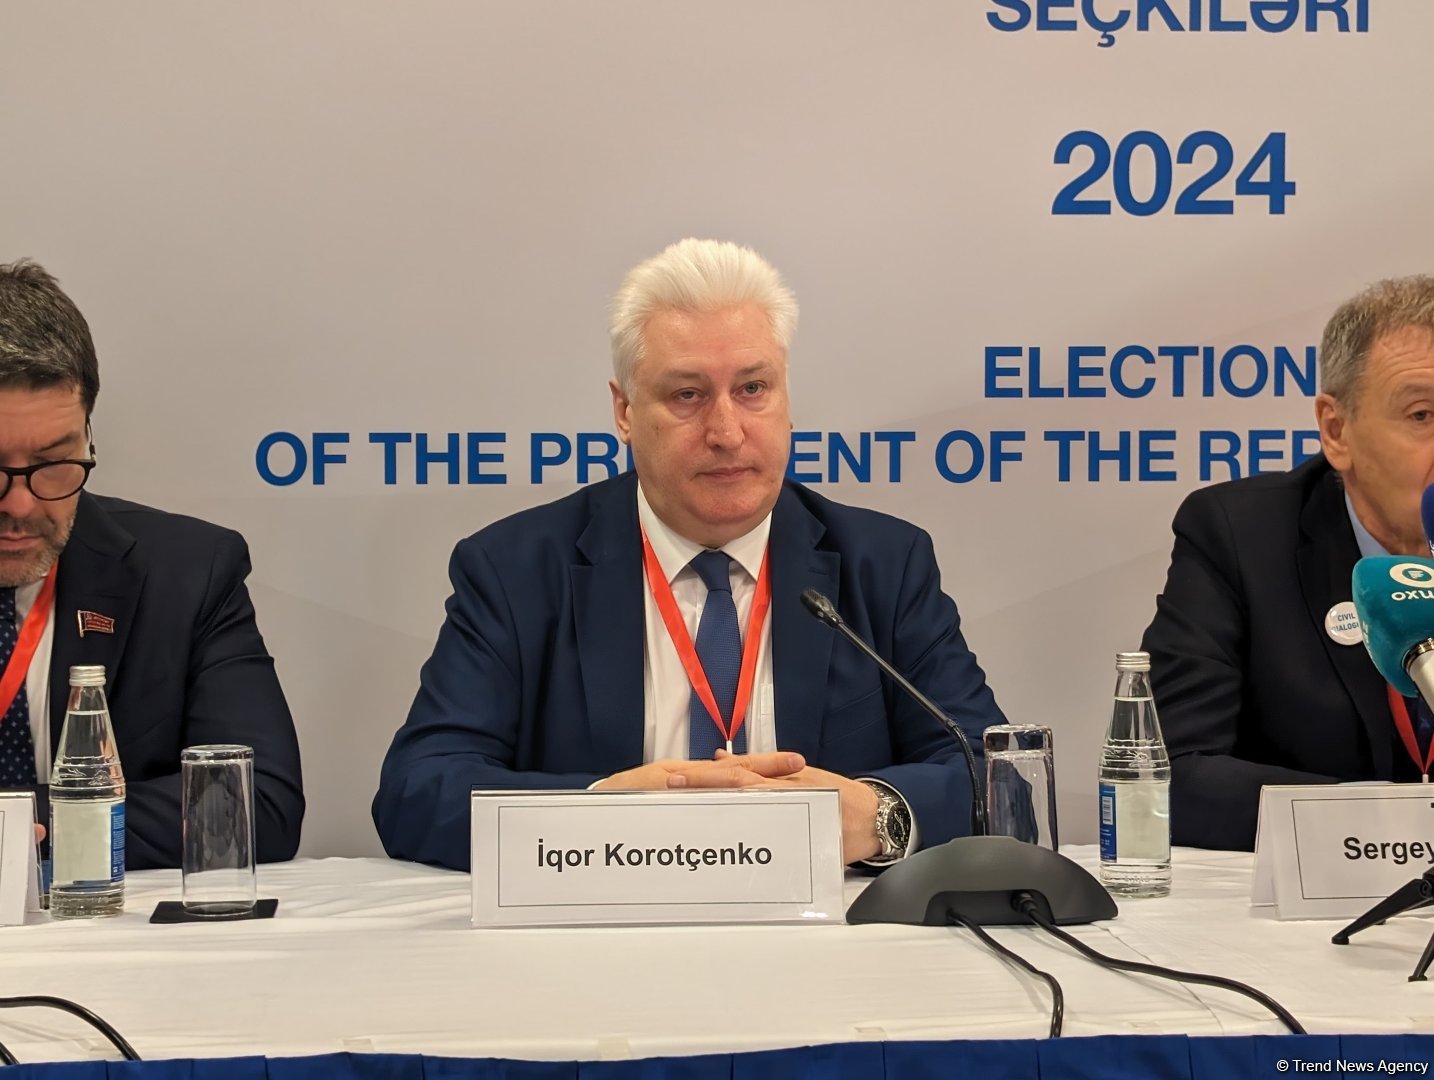 None of EU countries can boast same voter turnout as in Azerbaijan - Russian analyst